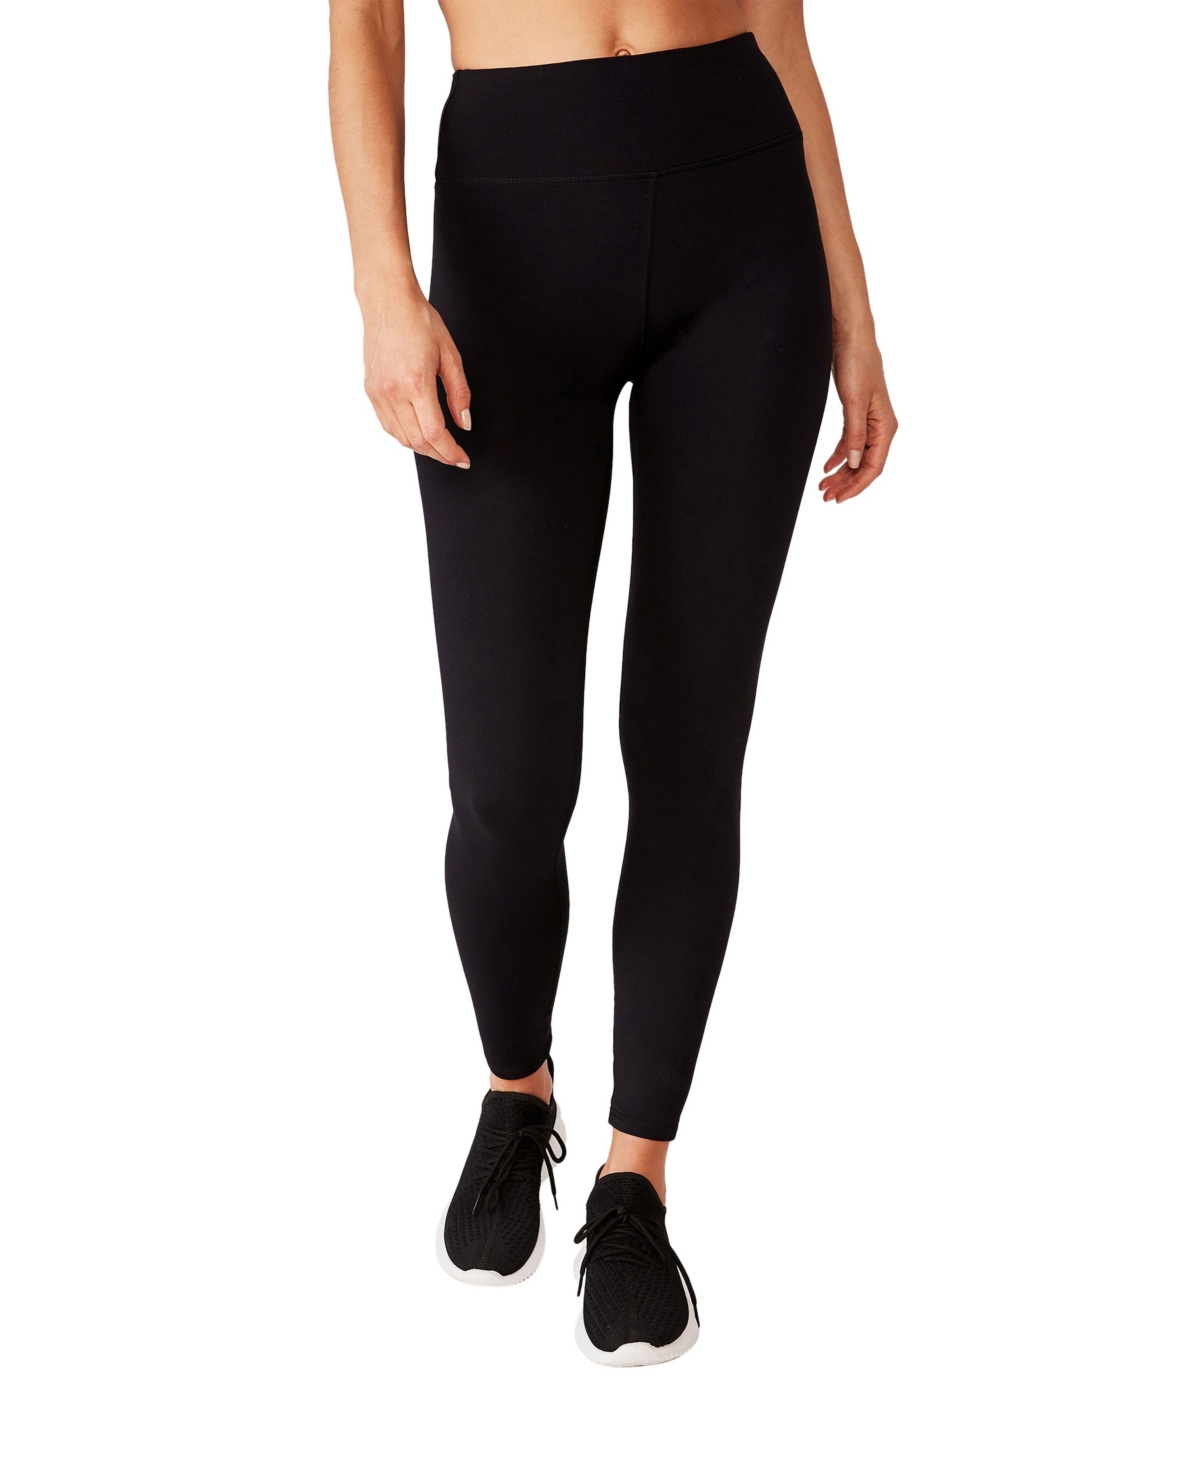 Cotton On Women's Active Core Tights